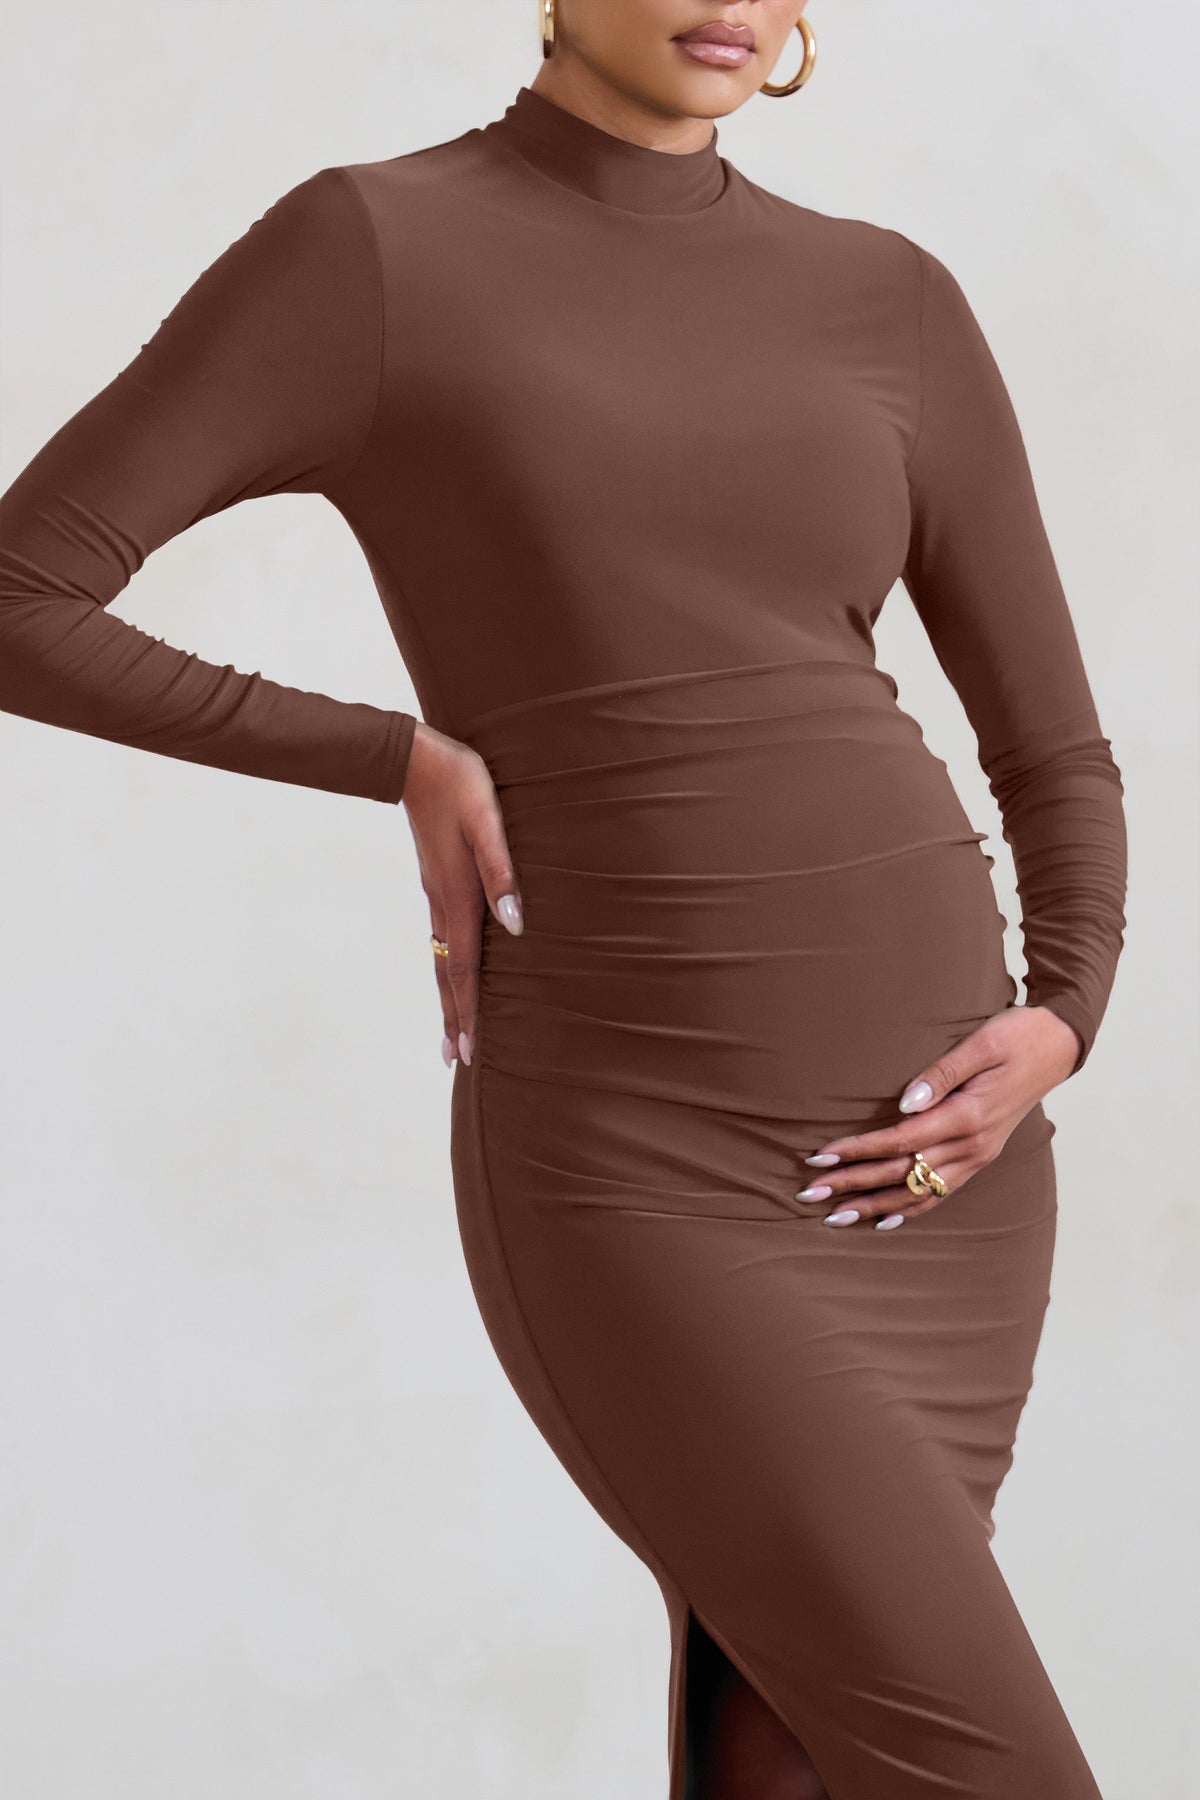 Size X-large Brown Maternity